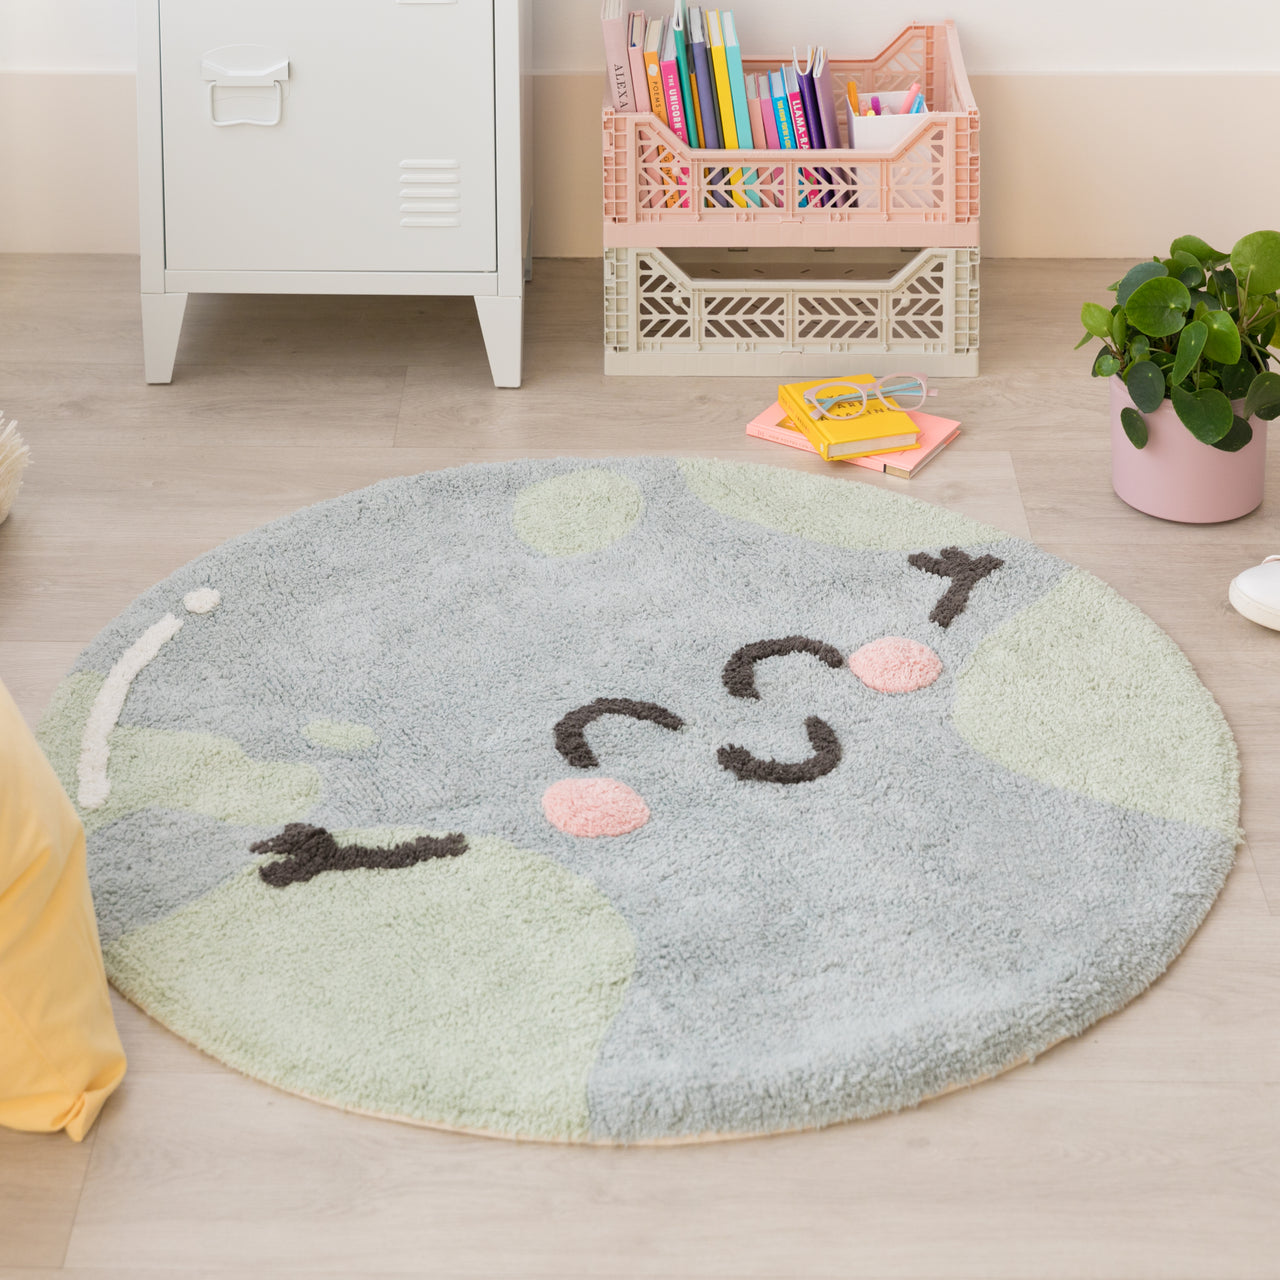 This friendly, smiling Earth rug from Lorena Canals is a cute reminder that we must take care of our planet and enviroment. With this beautiful Rug, you can decorate your children’s room with a modern and elegant style! 97% cotton, 3 % other fibres, round and machine-washable (conventional washing machine with 6 kg capacity), its design and neutral colours is a hit among the boys and girls.